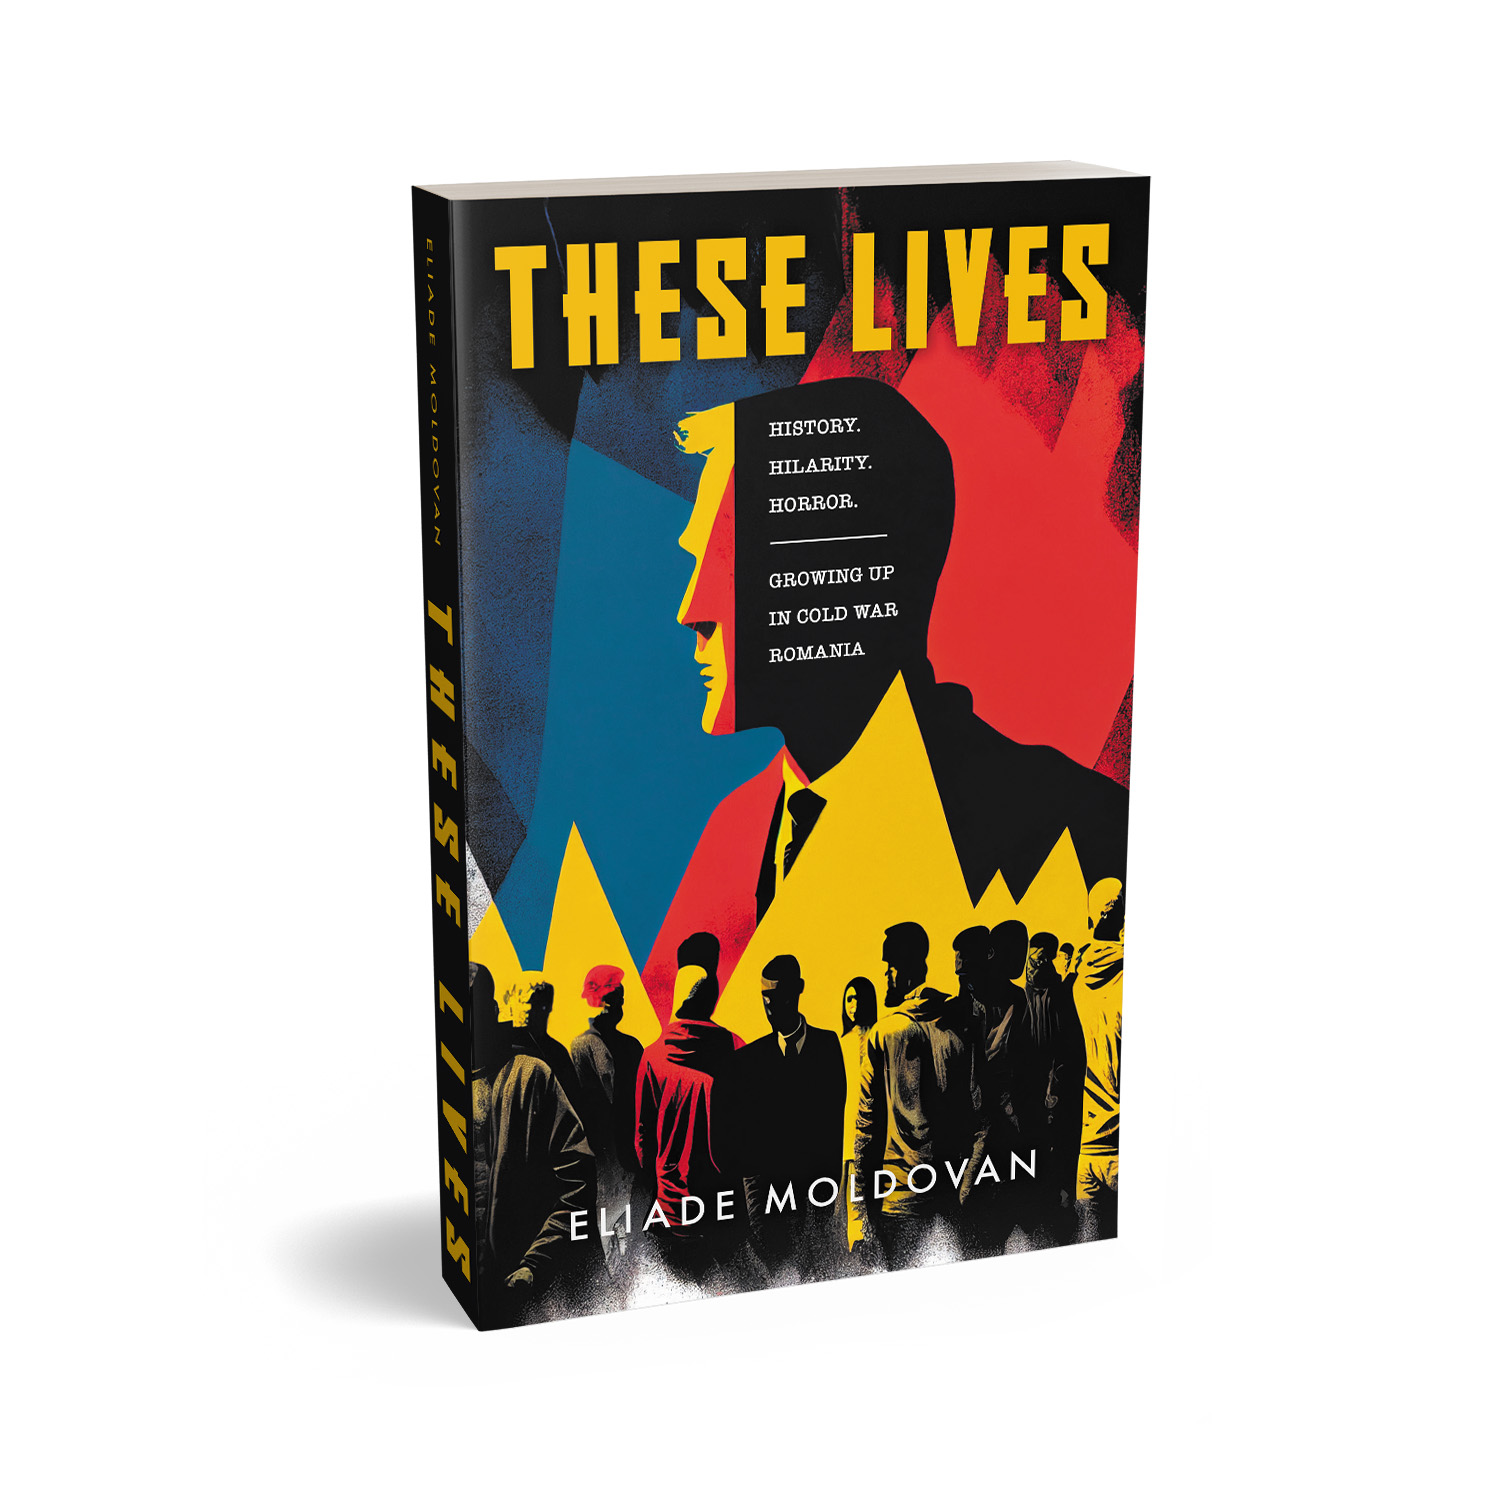 'These Lives' is an engrossing collection of personal stories from Cold War era Romania. The author is Eliade Moldovan. The book cover design and interior formatting is by Mark Thomas. To learn more about what Mark could do for your book, please visit coverness.com.